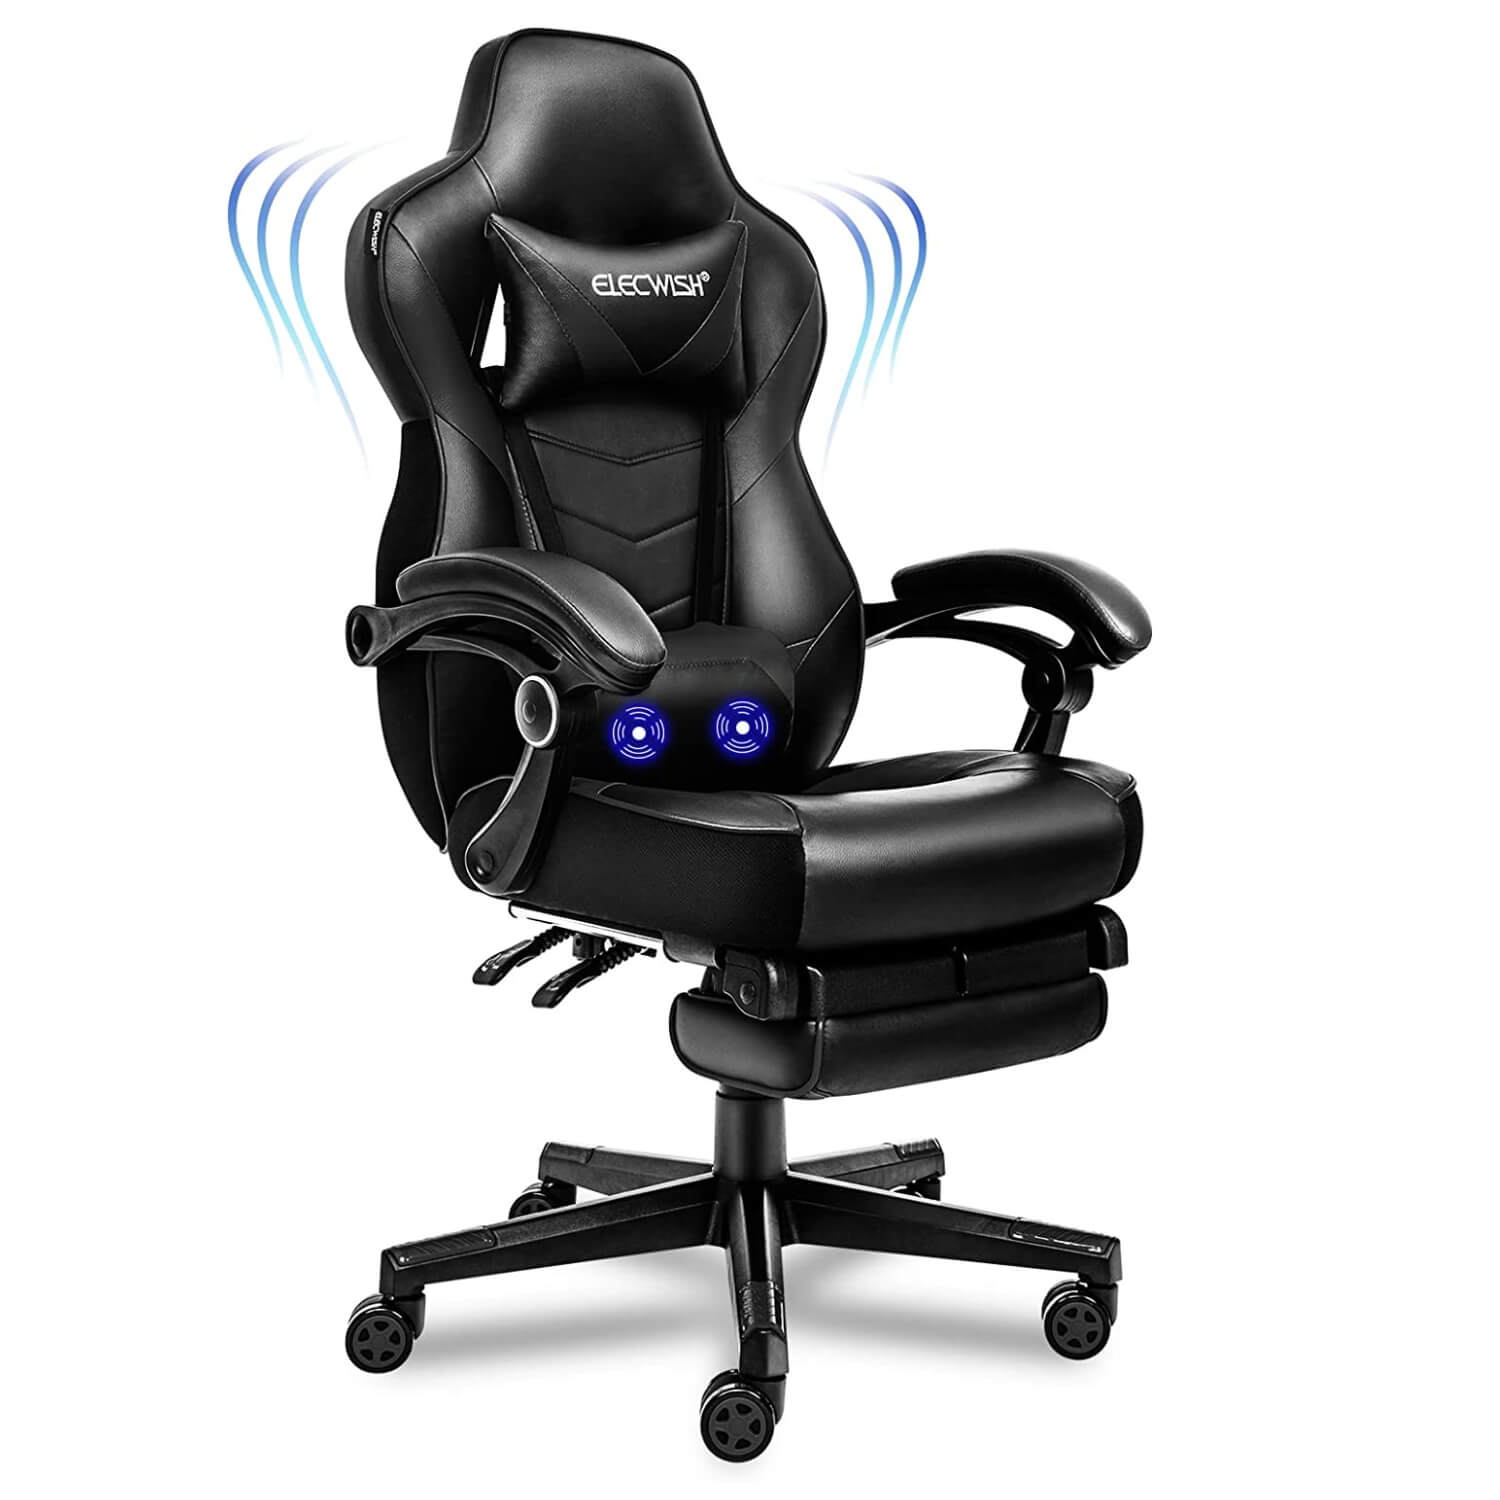 Elecwish massage gaming chair with footrest OC112 black